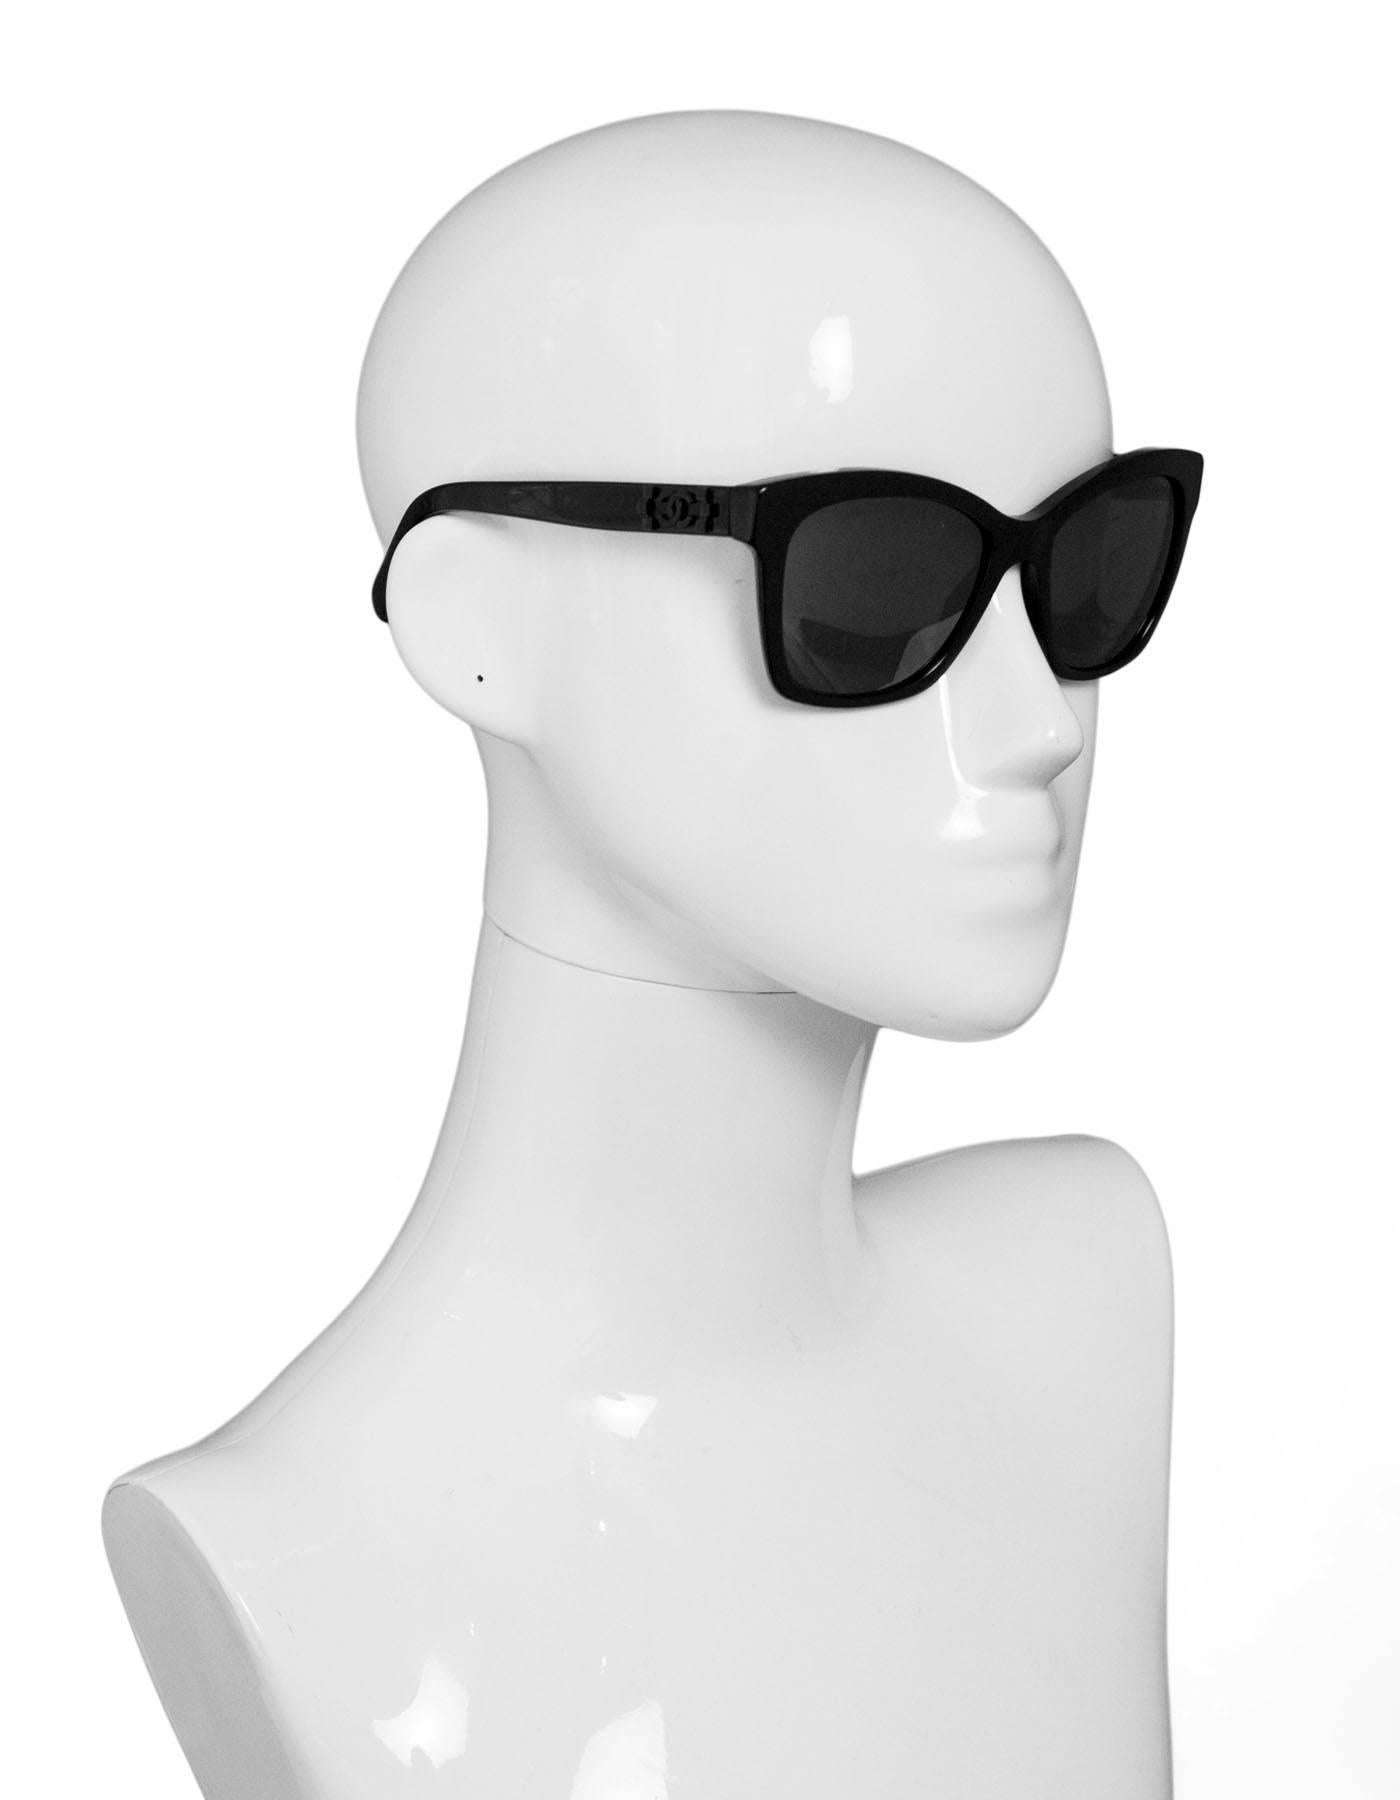 Chanel Black Lego Butterfly Spring Sunglasses

Made In: Italy
Color: Black
Materials: Resin
Retail Price: $365 + tax
Overall Condition: Excellent pre-owned condition with the exception of misaligned jinges, some surface marks 
Included: Chanel box,